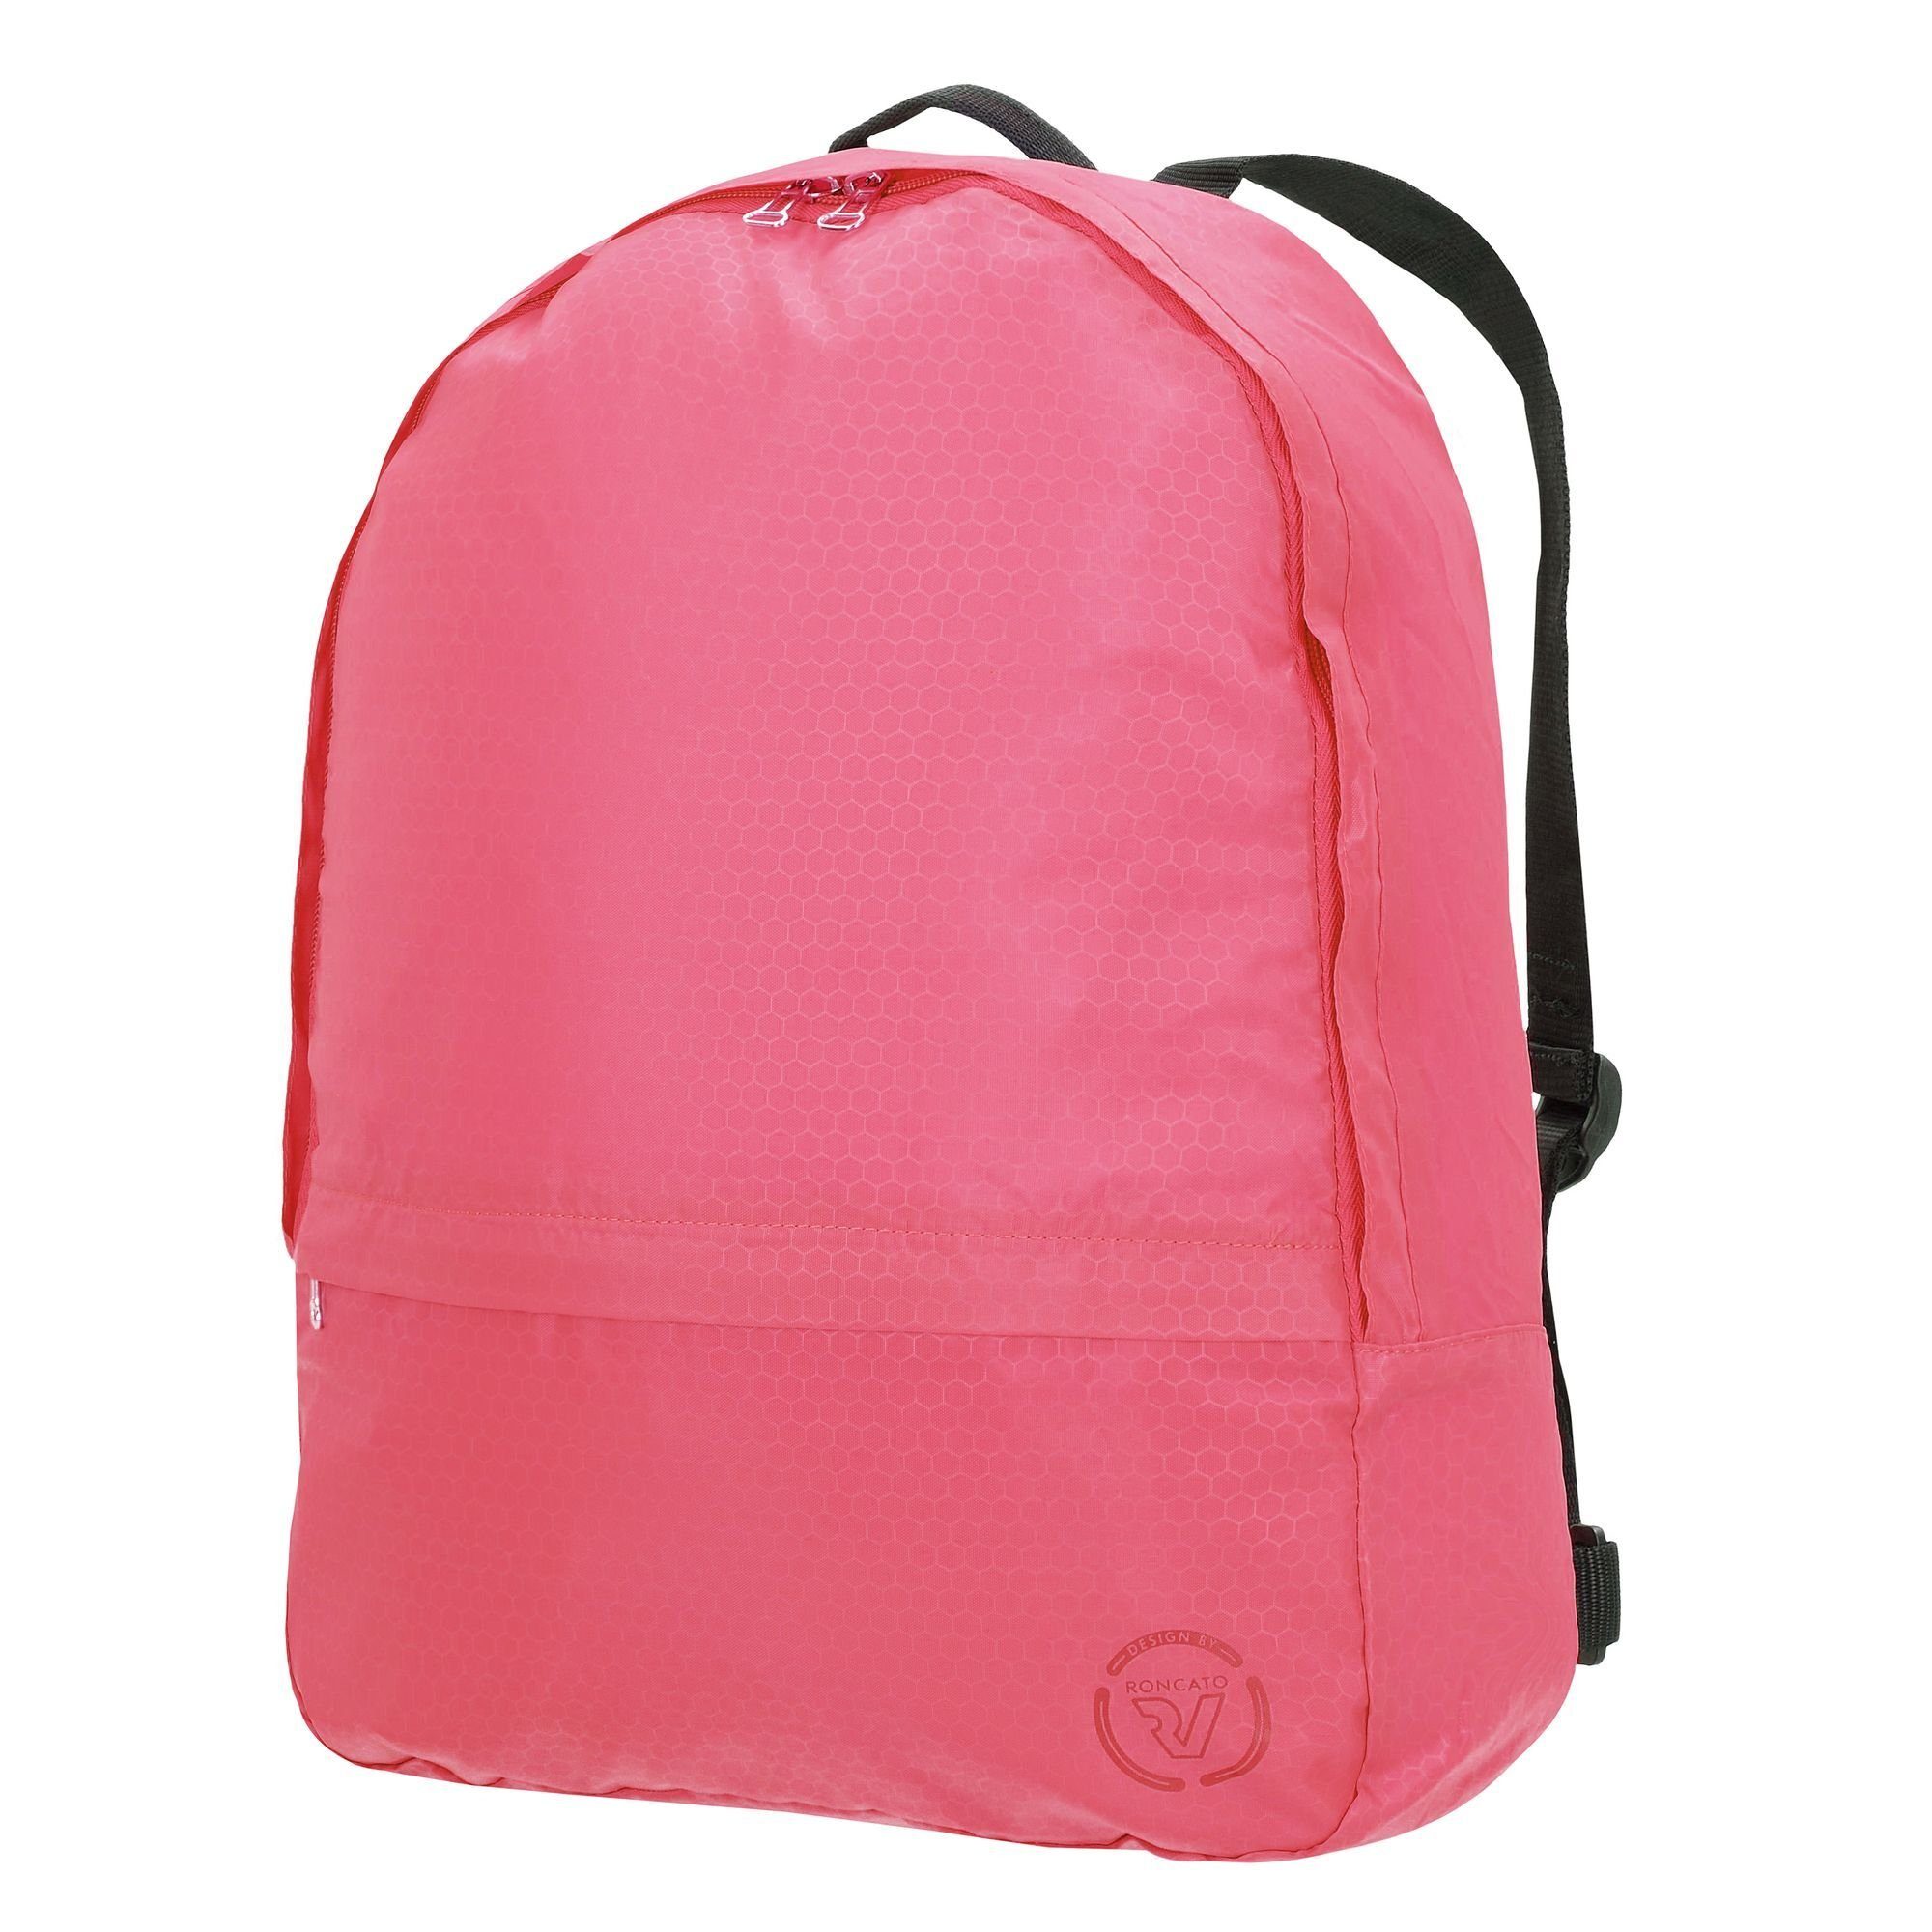 Cityrucksack RONCATO Accessoires, Polyester Foldable pink